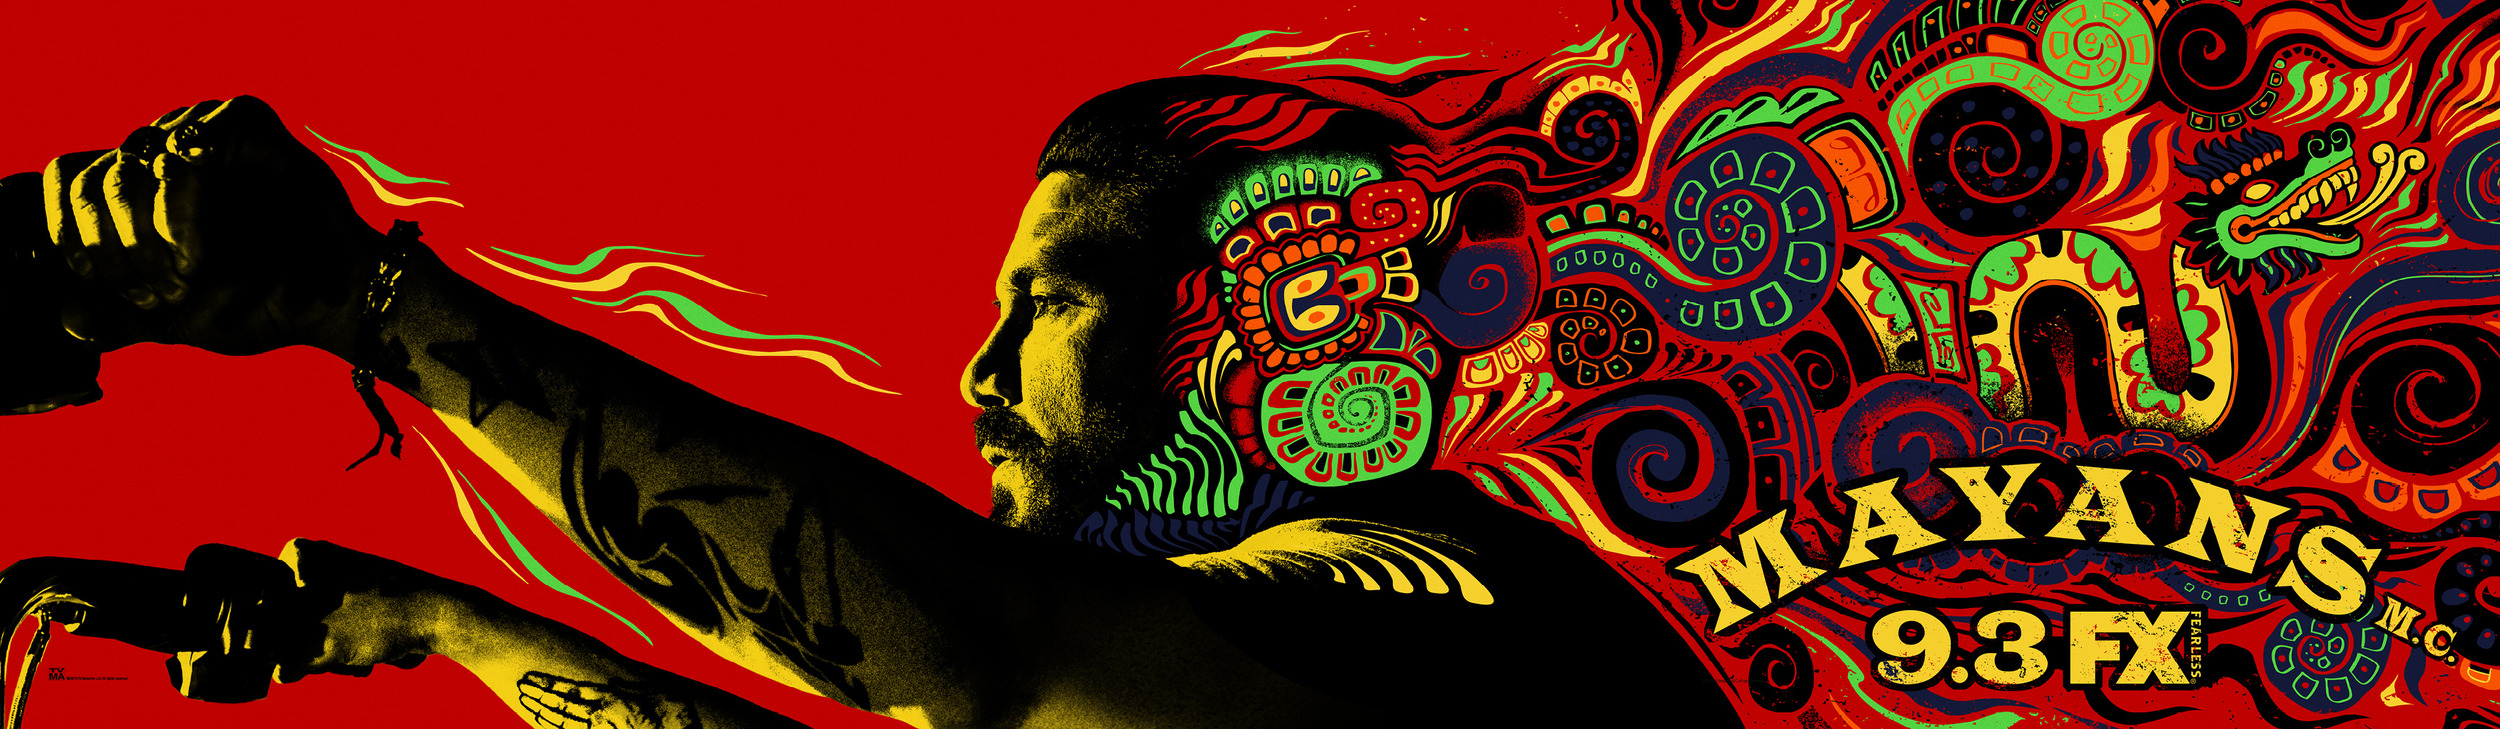 Mega Sized Movie Poster Image for Mayans M.C. (#8 of 19)